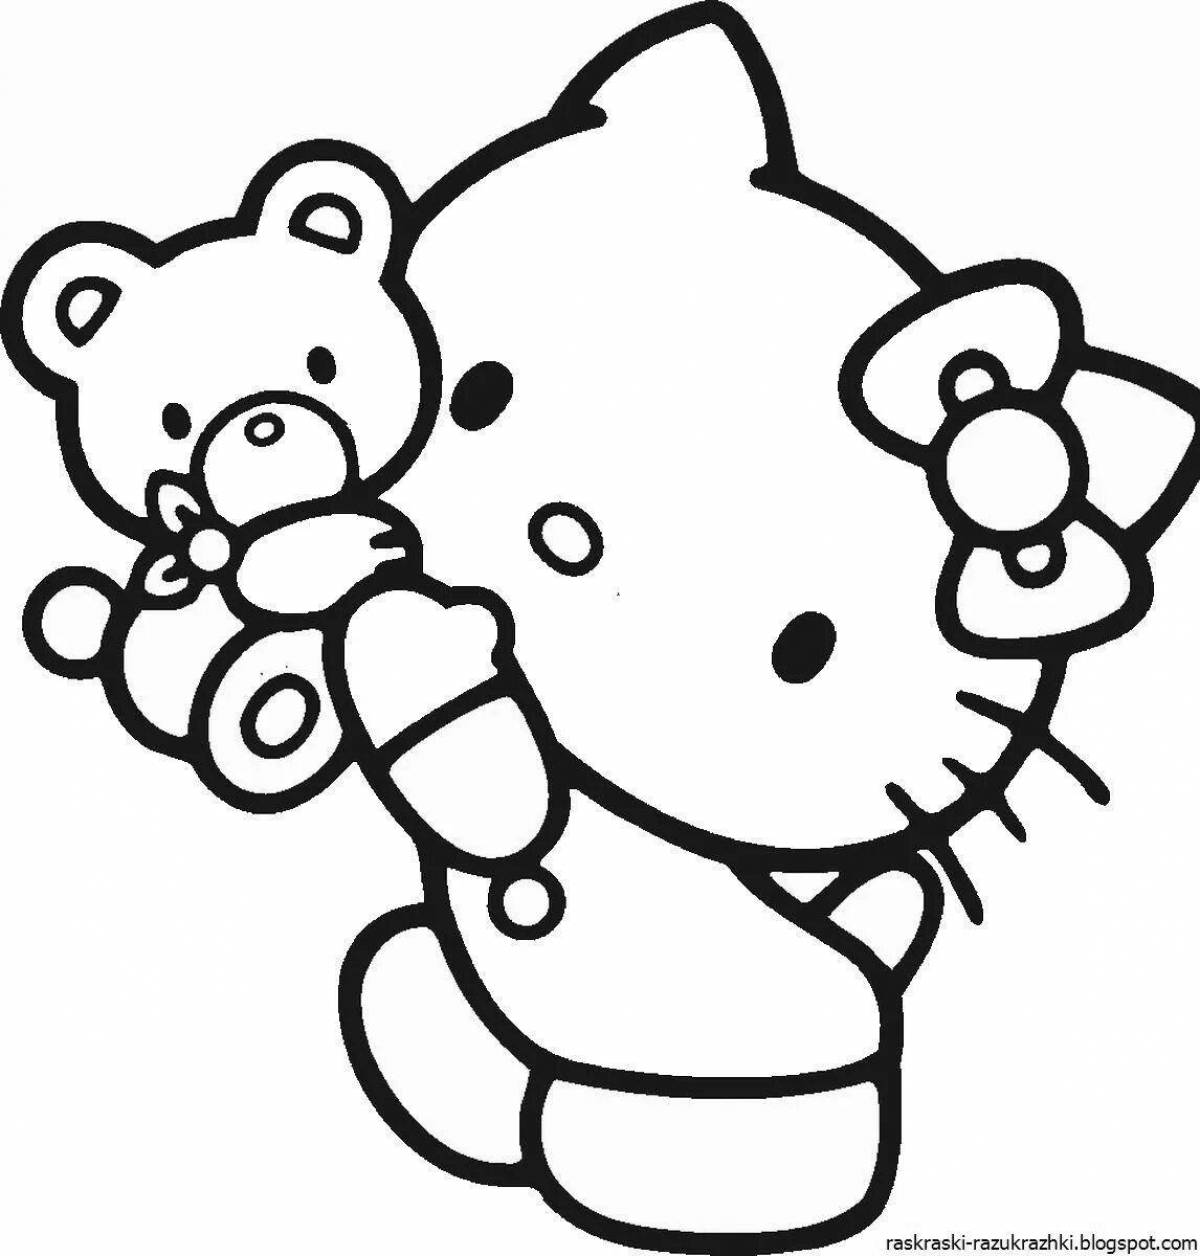 Cute and playful teddy bear coloring book